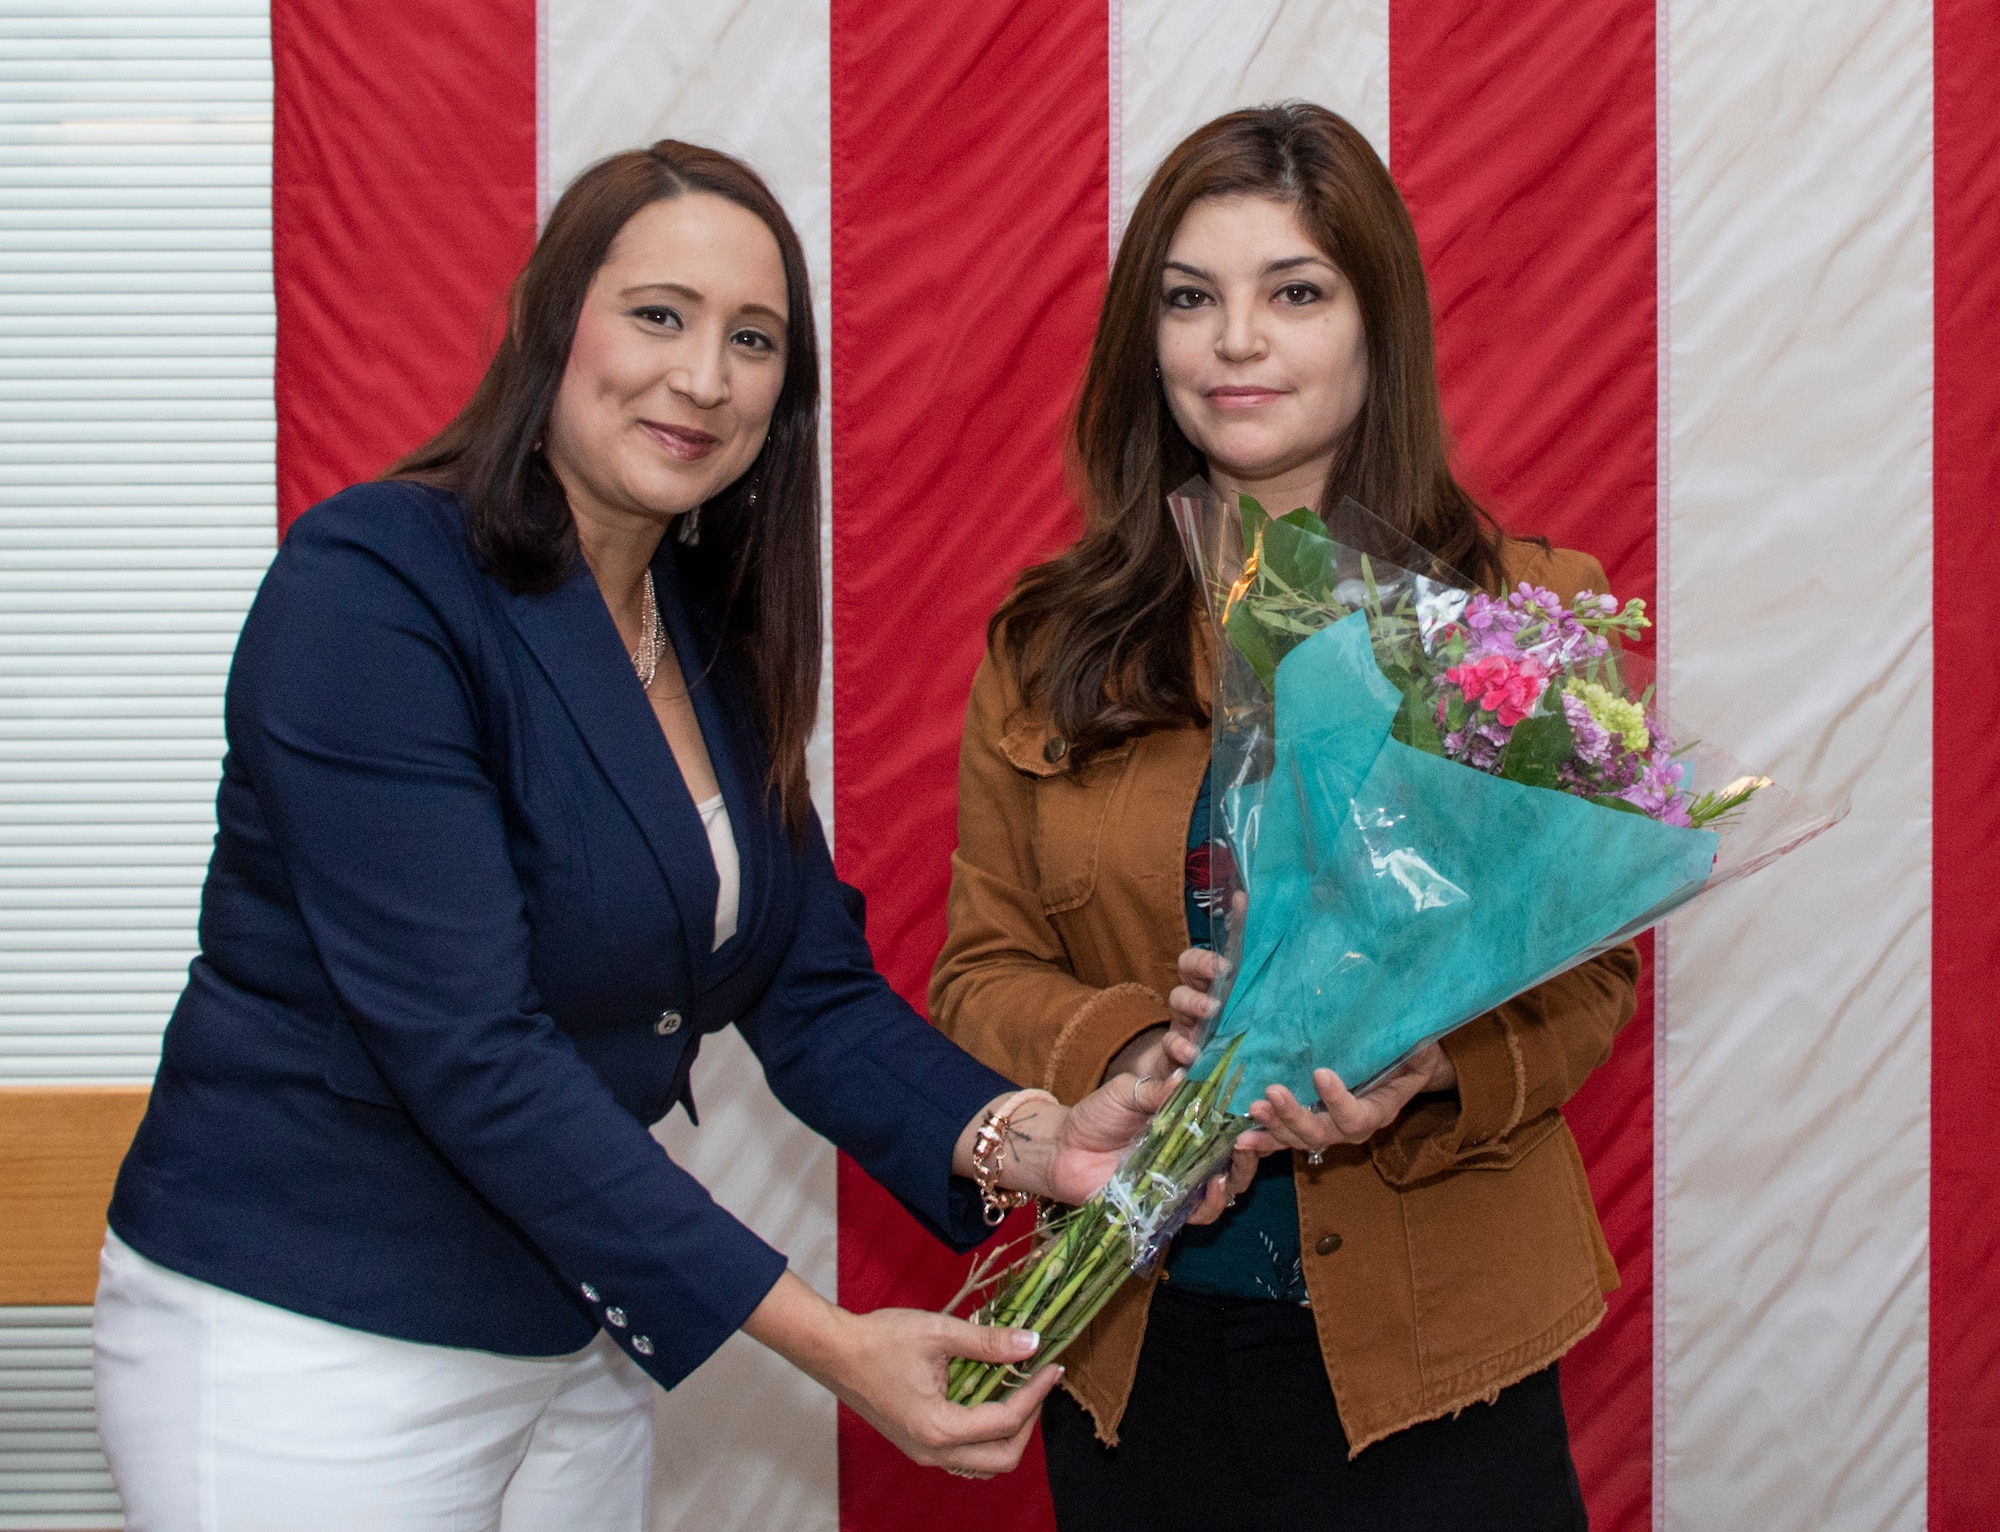 Najette Pinero, left, Airman and Family Readiness Center Community Readiness consultant, presents Jessica Moser, Key Spouse of the Year, 2018, a bouquet of flowers during the Key Spouse Recognition event at the 60th Maintenance Group atrium, Feb. 8, 2019 at Travis Air Force Base, California. Moser is the Key Spouse of the Year for 2018. The Key Spouse Program is an Air Force-wide volunteer program that builds and fosters support for military families through outreach education events and providing families a link to leadership. (U.S. Air Force photo by Heide Couch)